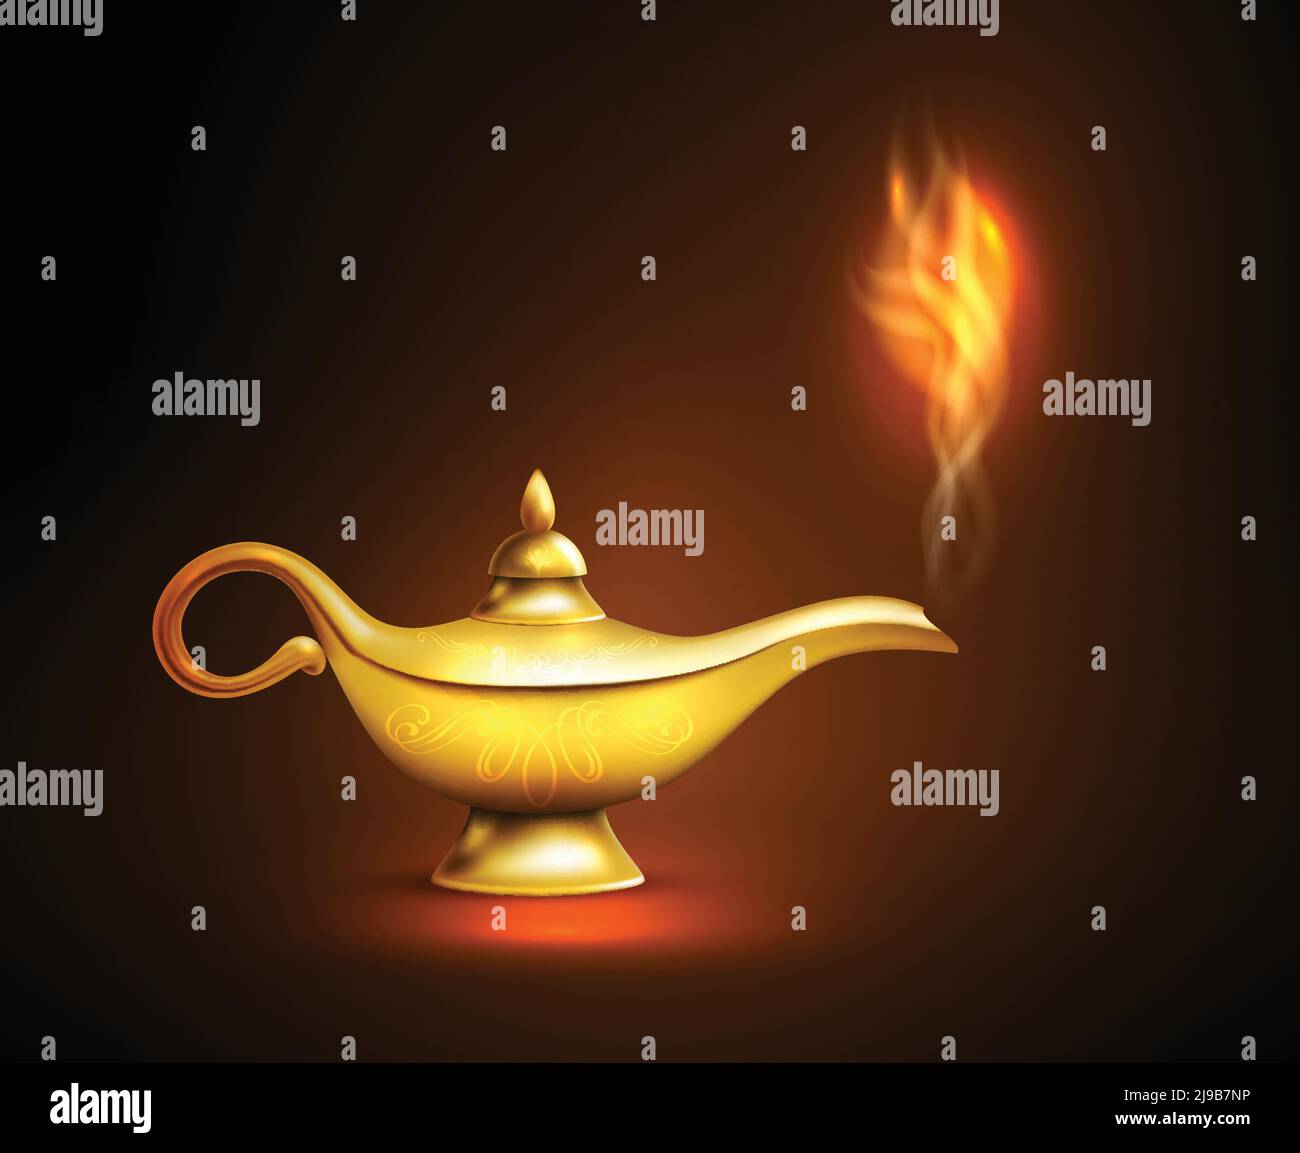 Realistic aladdin lamp smoke icon yellow iron placed on the surface and casts a shadow vector illustration Stock Vector